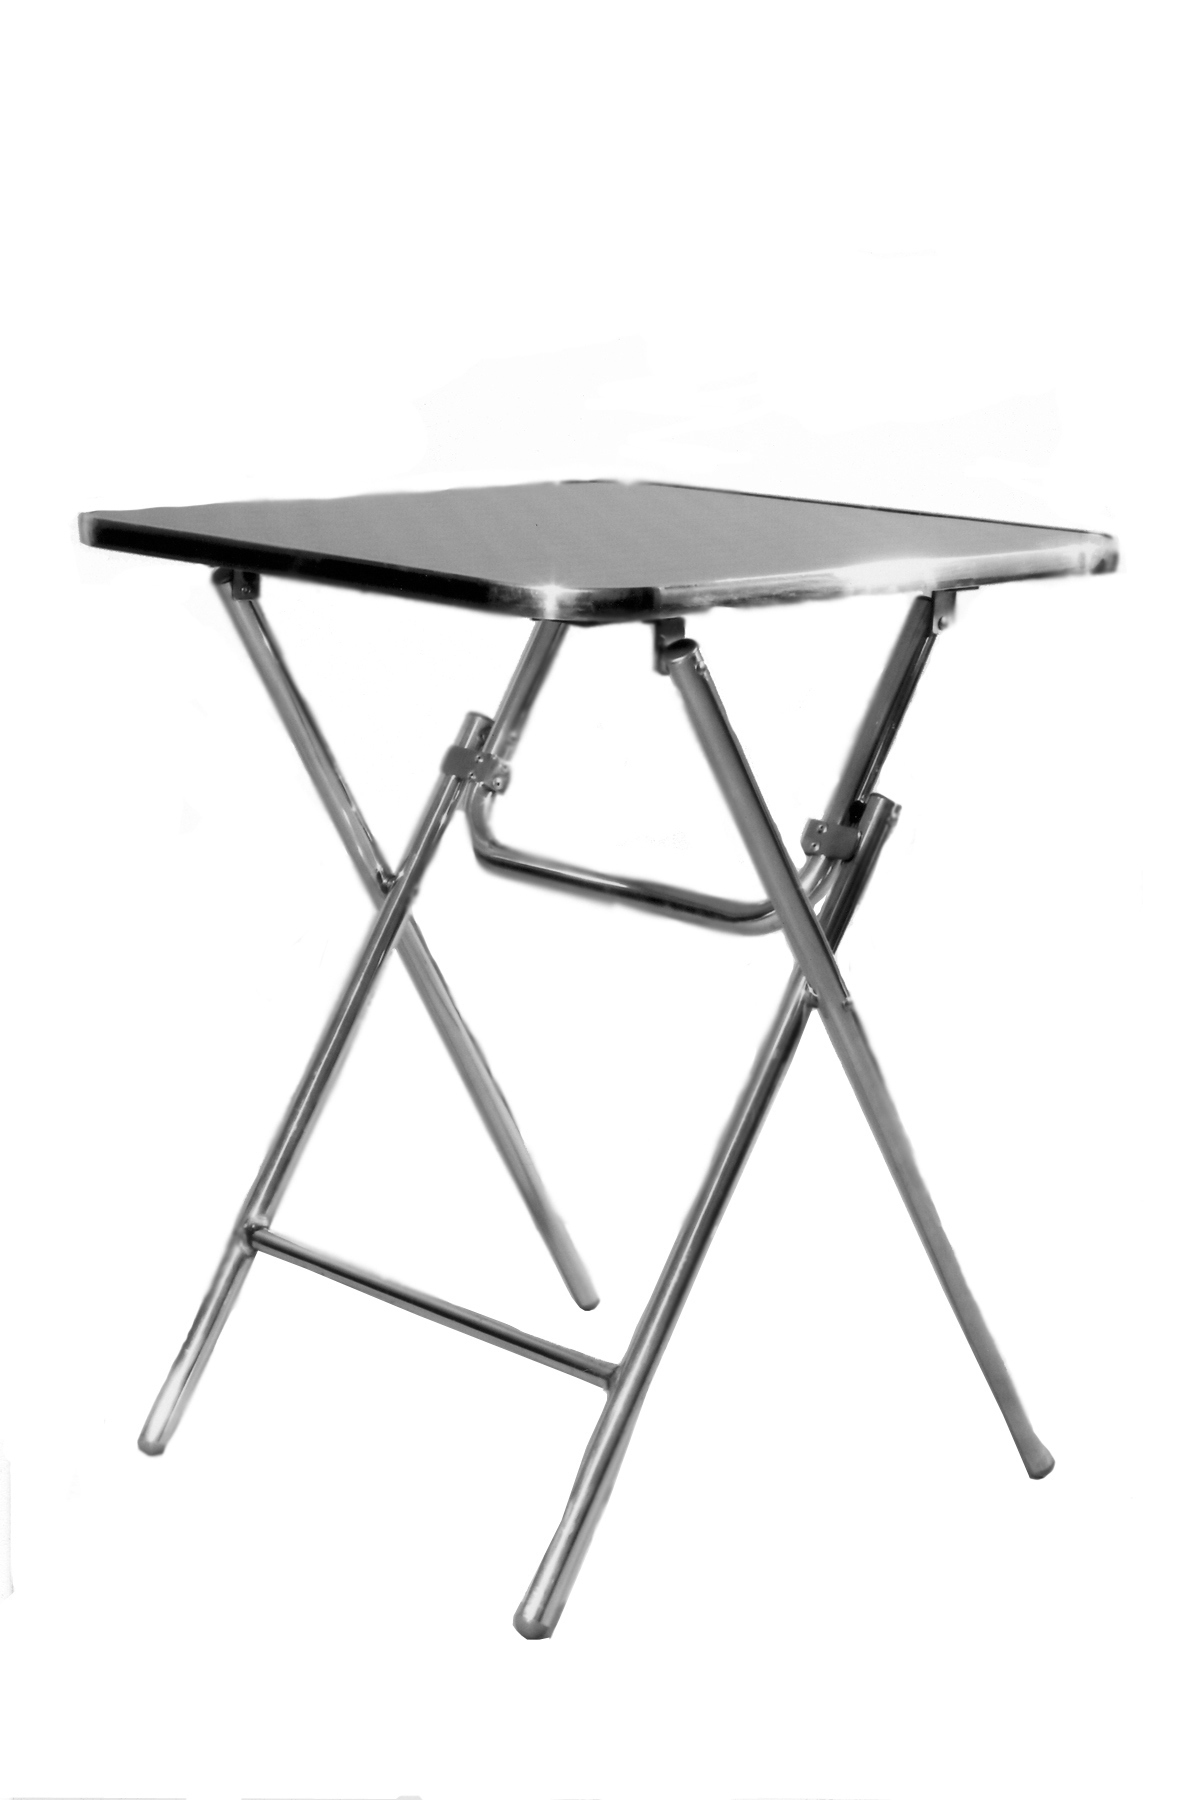 Aluminium Folding Table With Top Of Stainless Steel Holographic Pattern